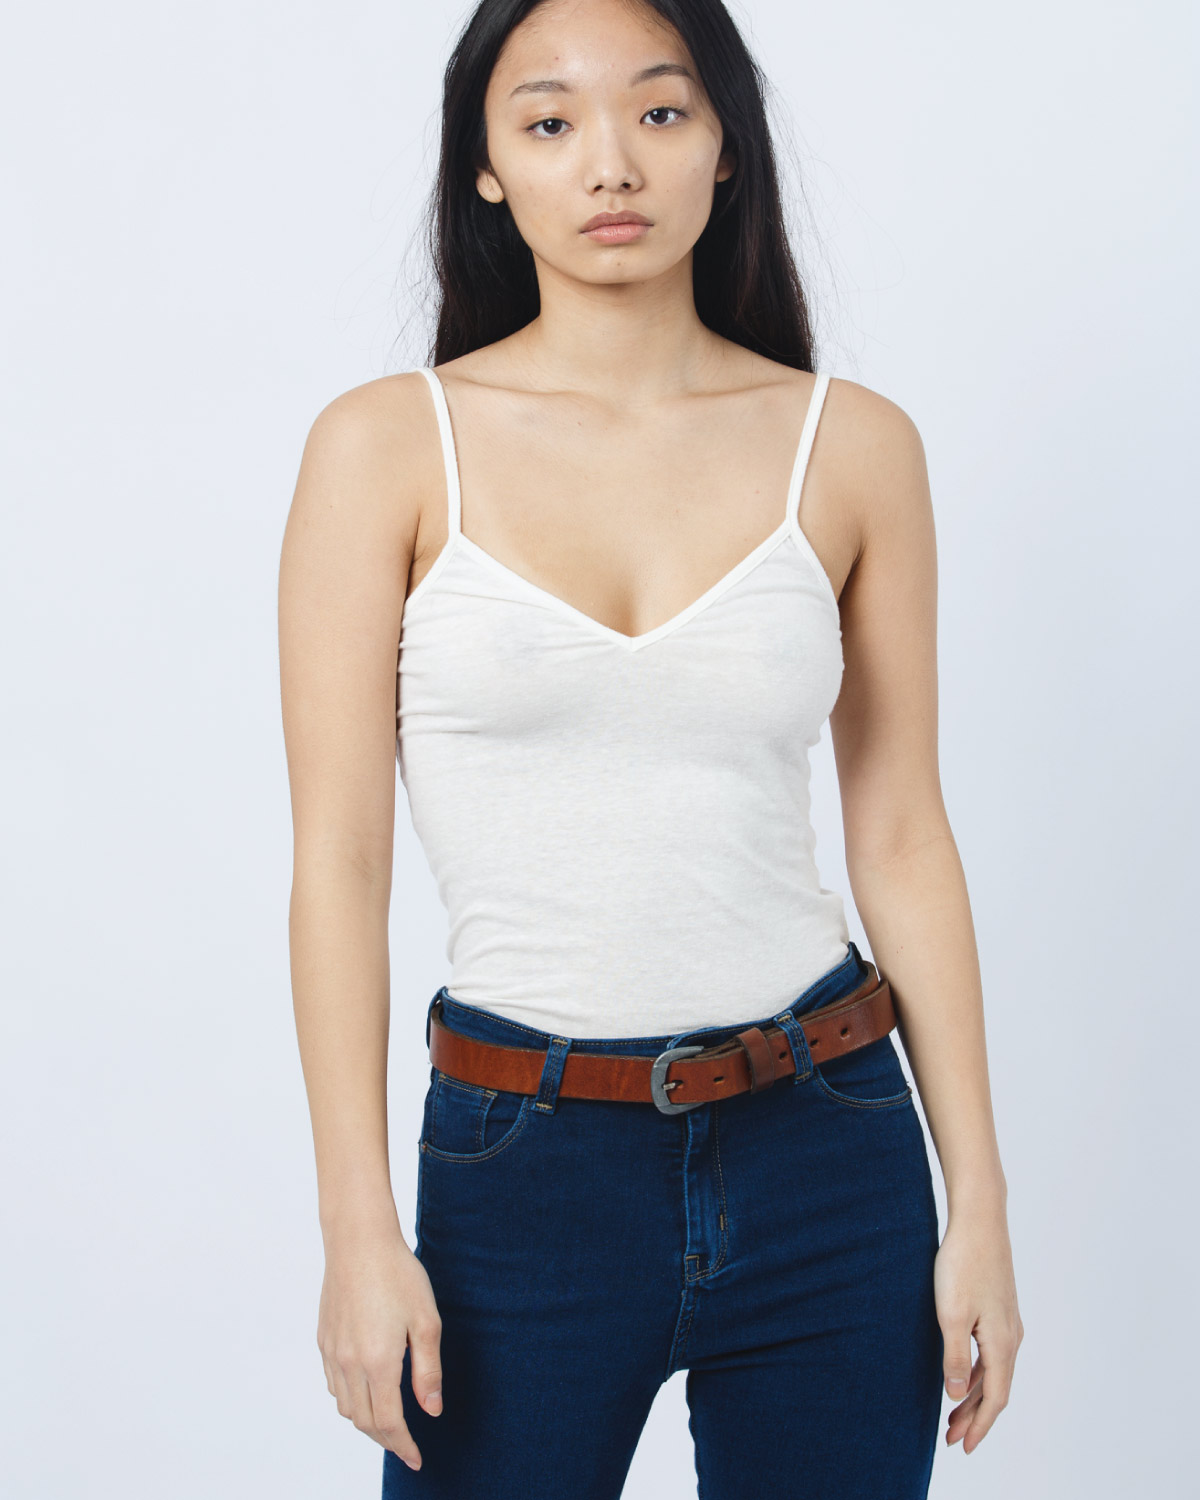 wanama_musculosa-claire-long-iii_33-13-2022__picture-10018